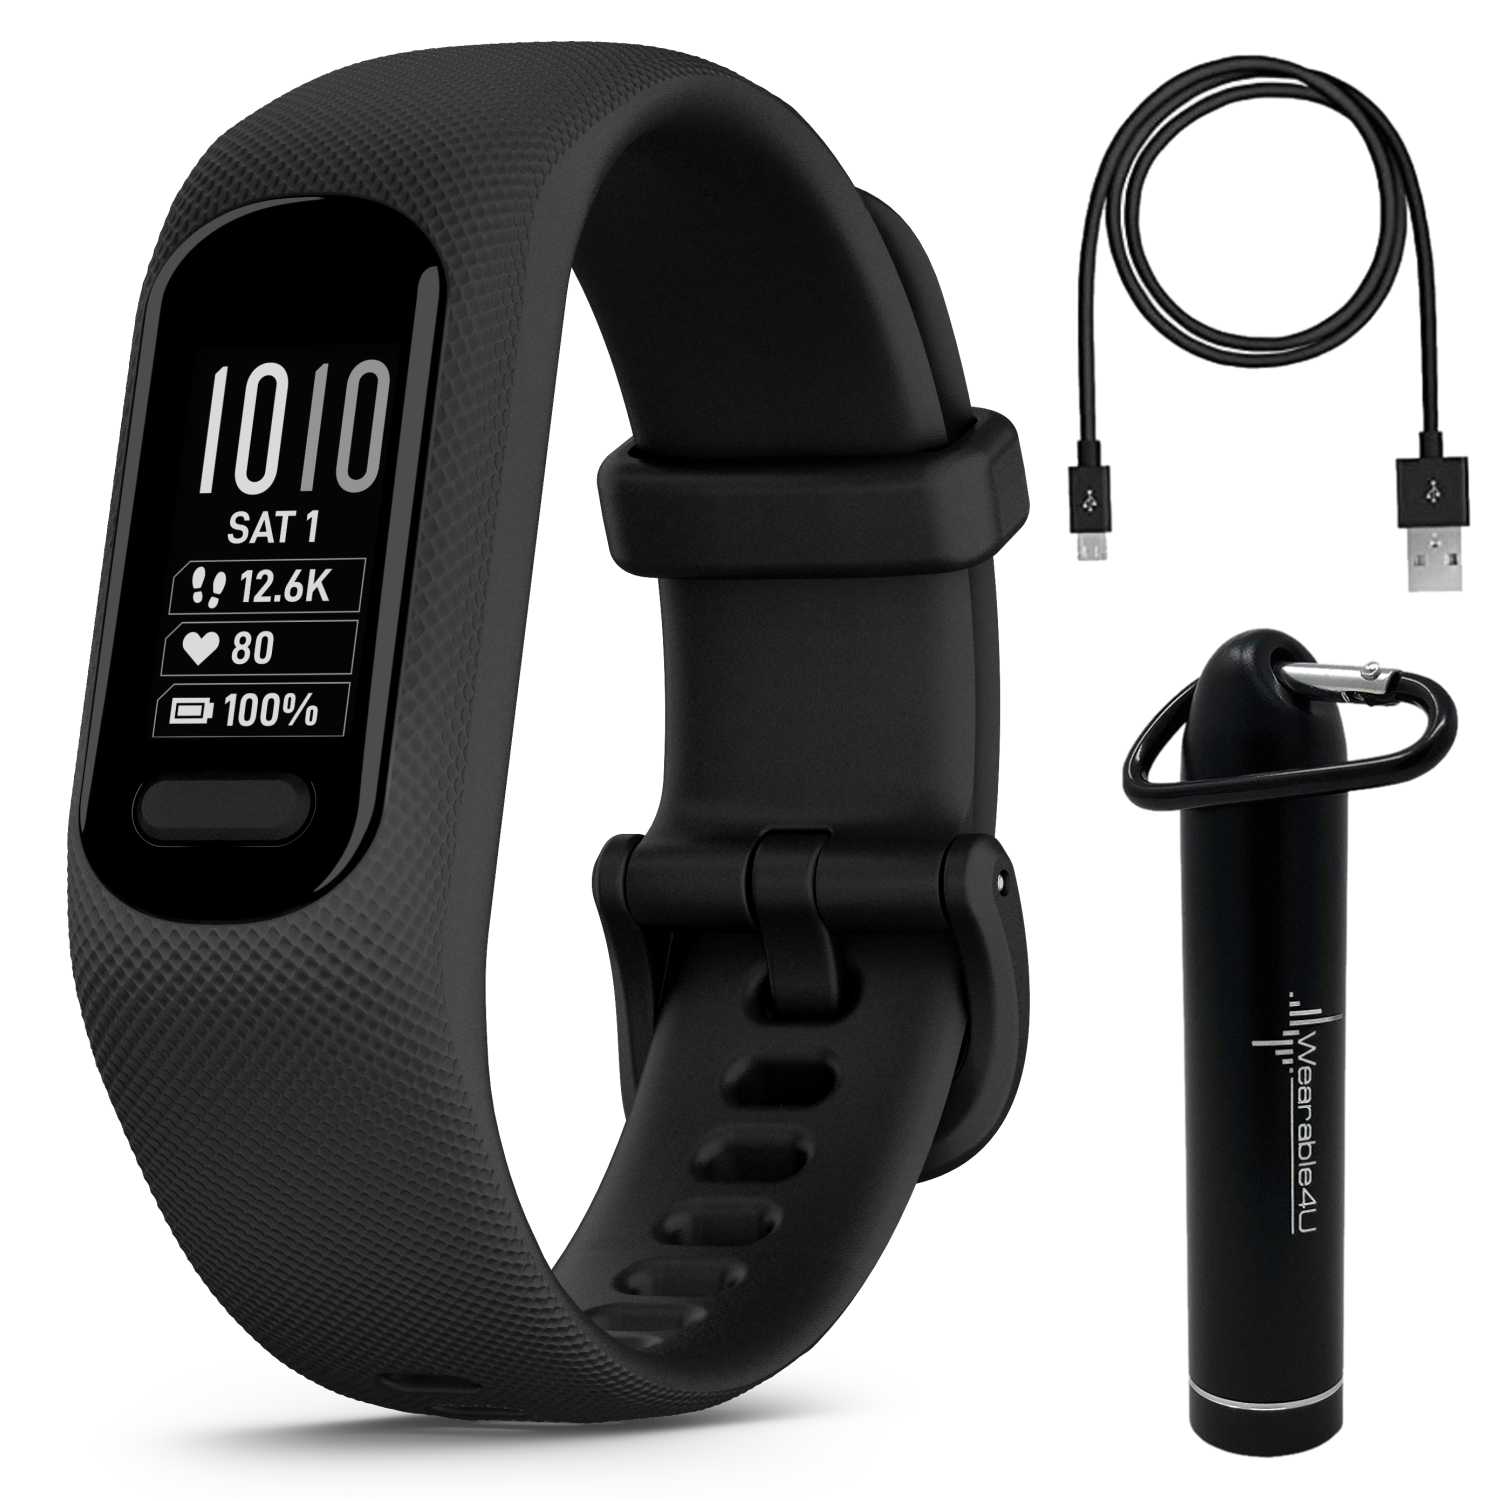 Vivosmart Tracker, Health Case Sports Black Garmin Fitness – with Gadgets and Smart W 5 and